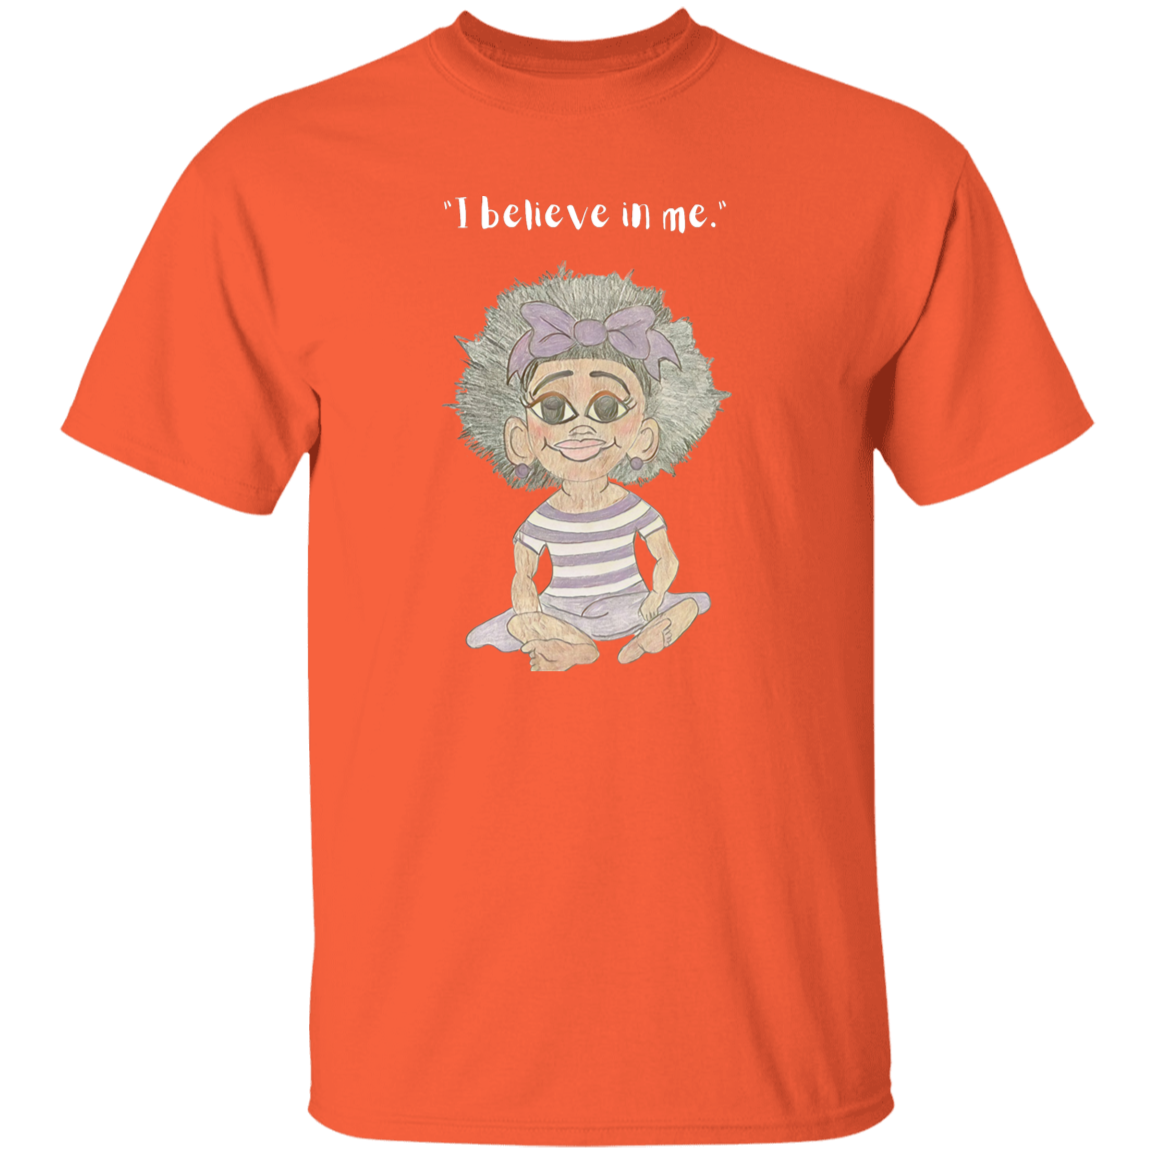 I believe in me Youth 5.3 oz 100% Cotton T-Shirt